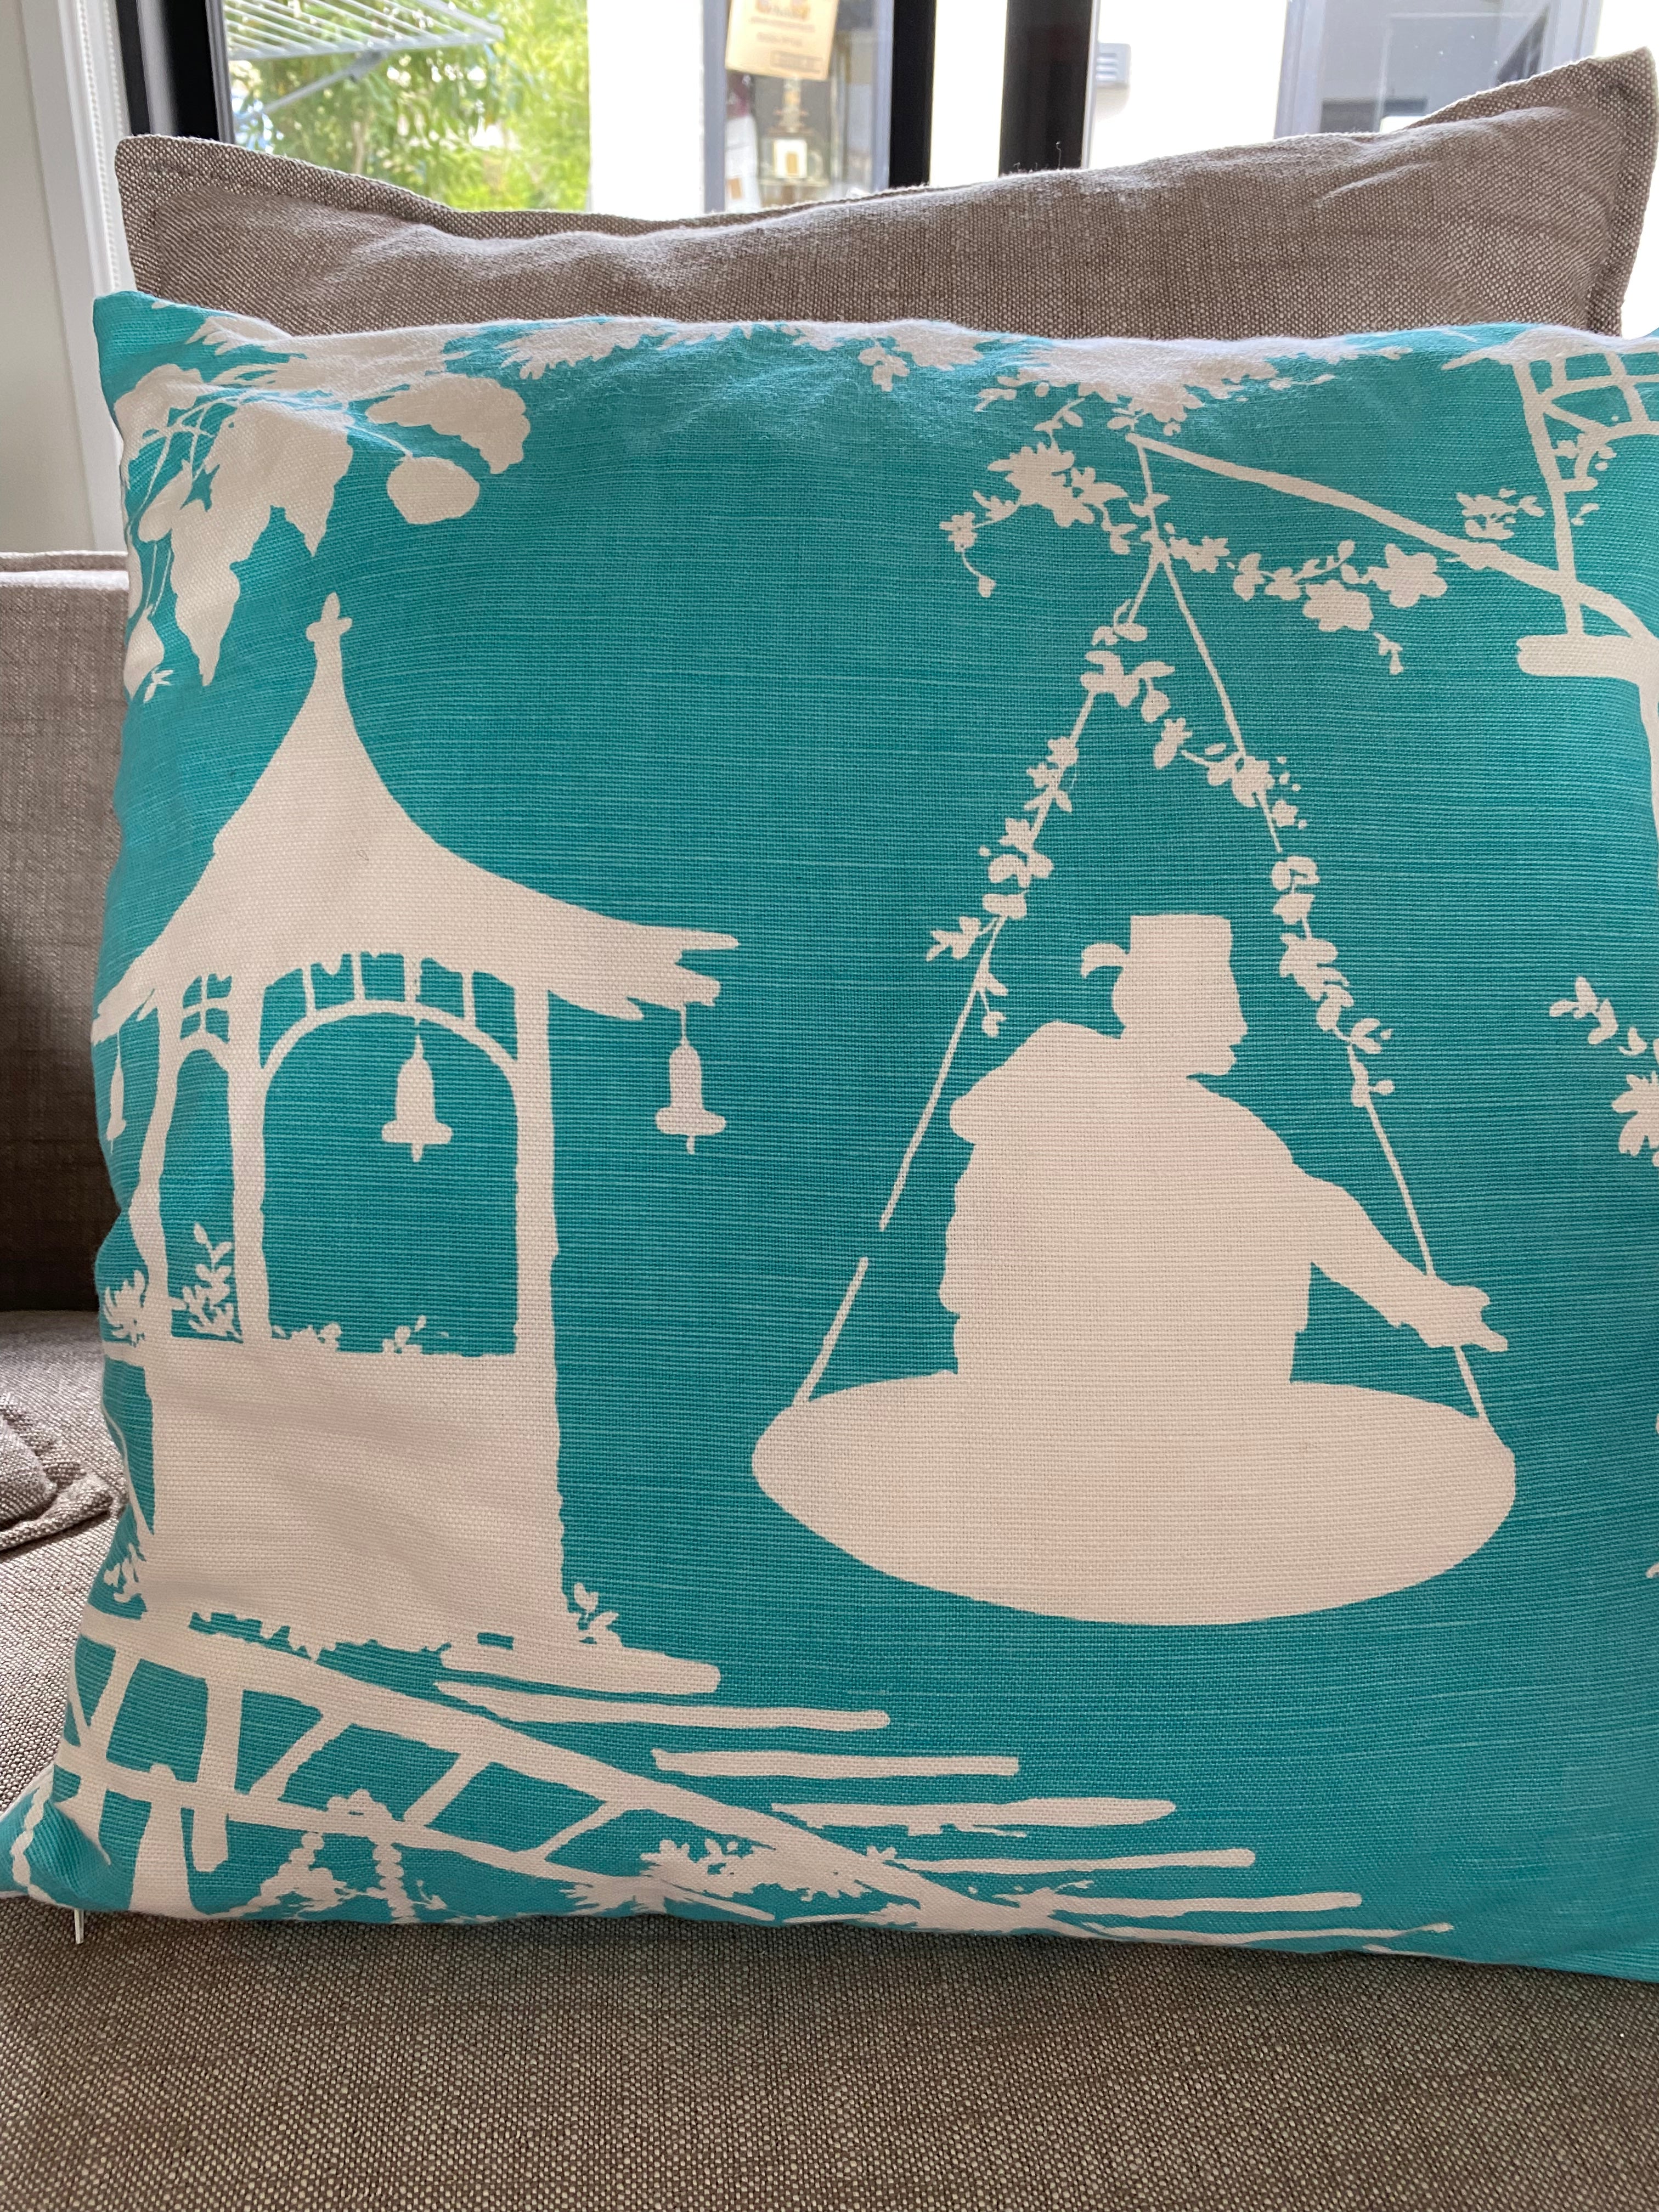 Designer cushion cover in linen/cotton. Turquoise & white oriental theme! White only on backside